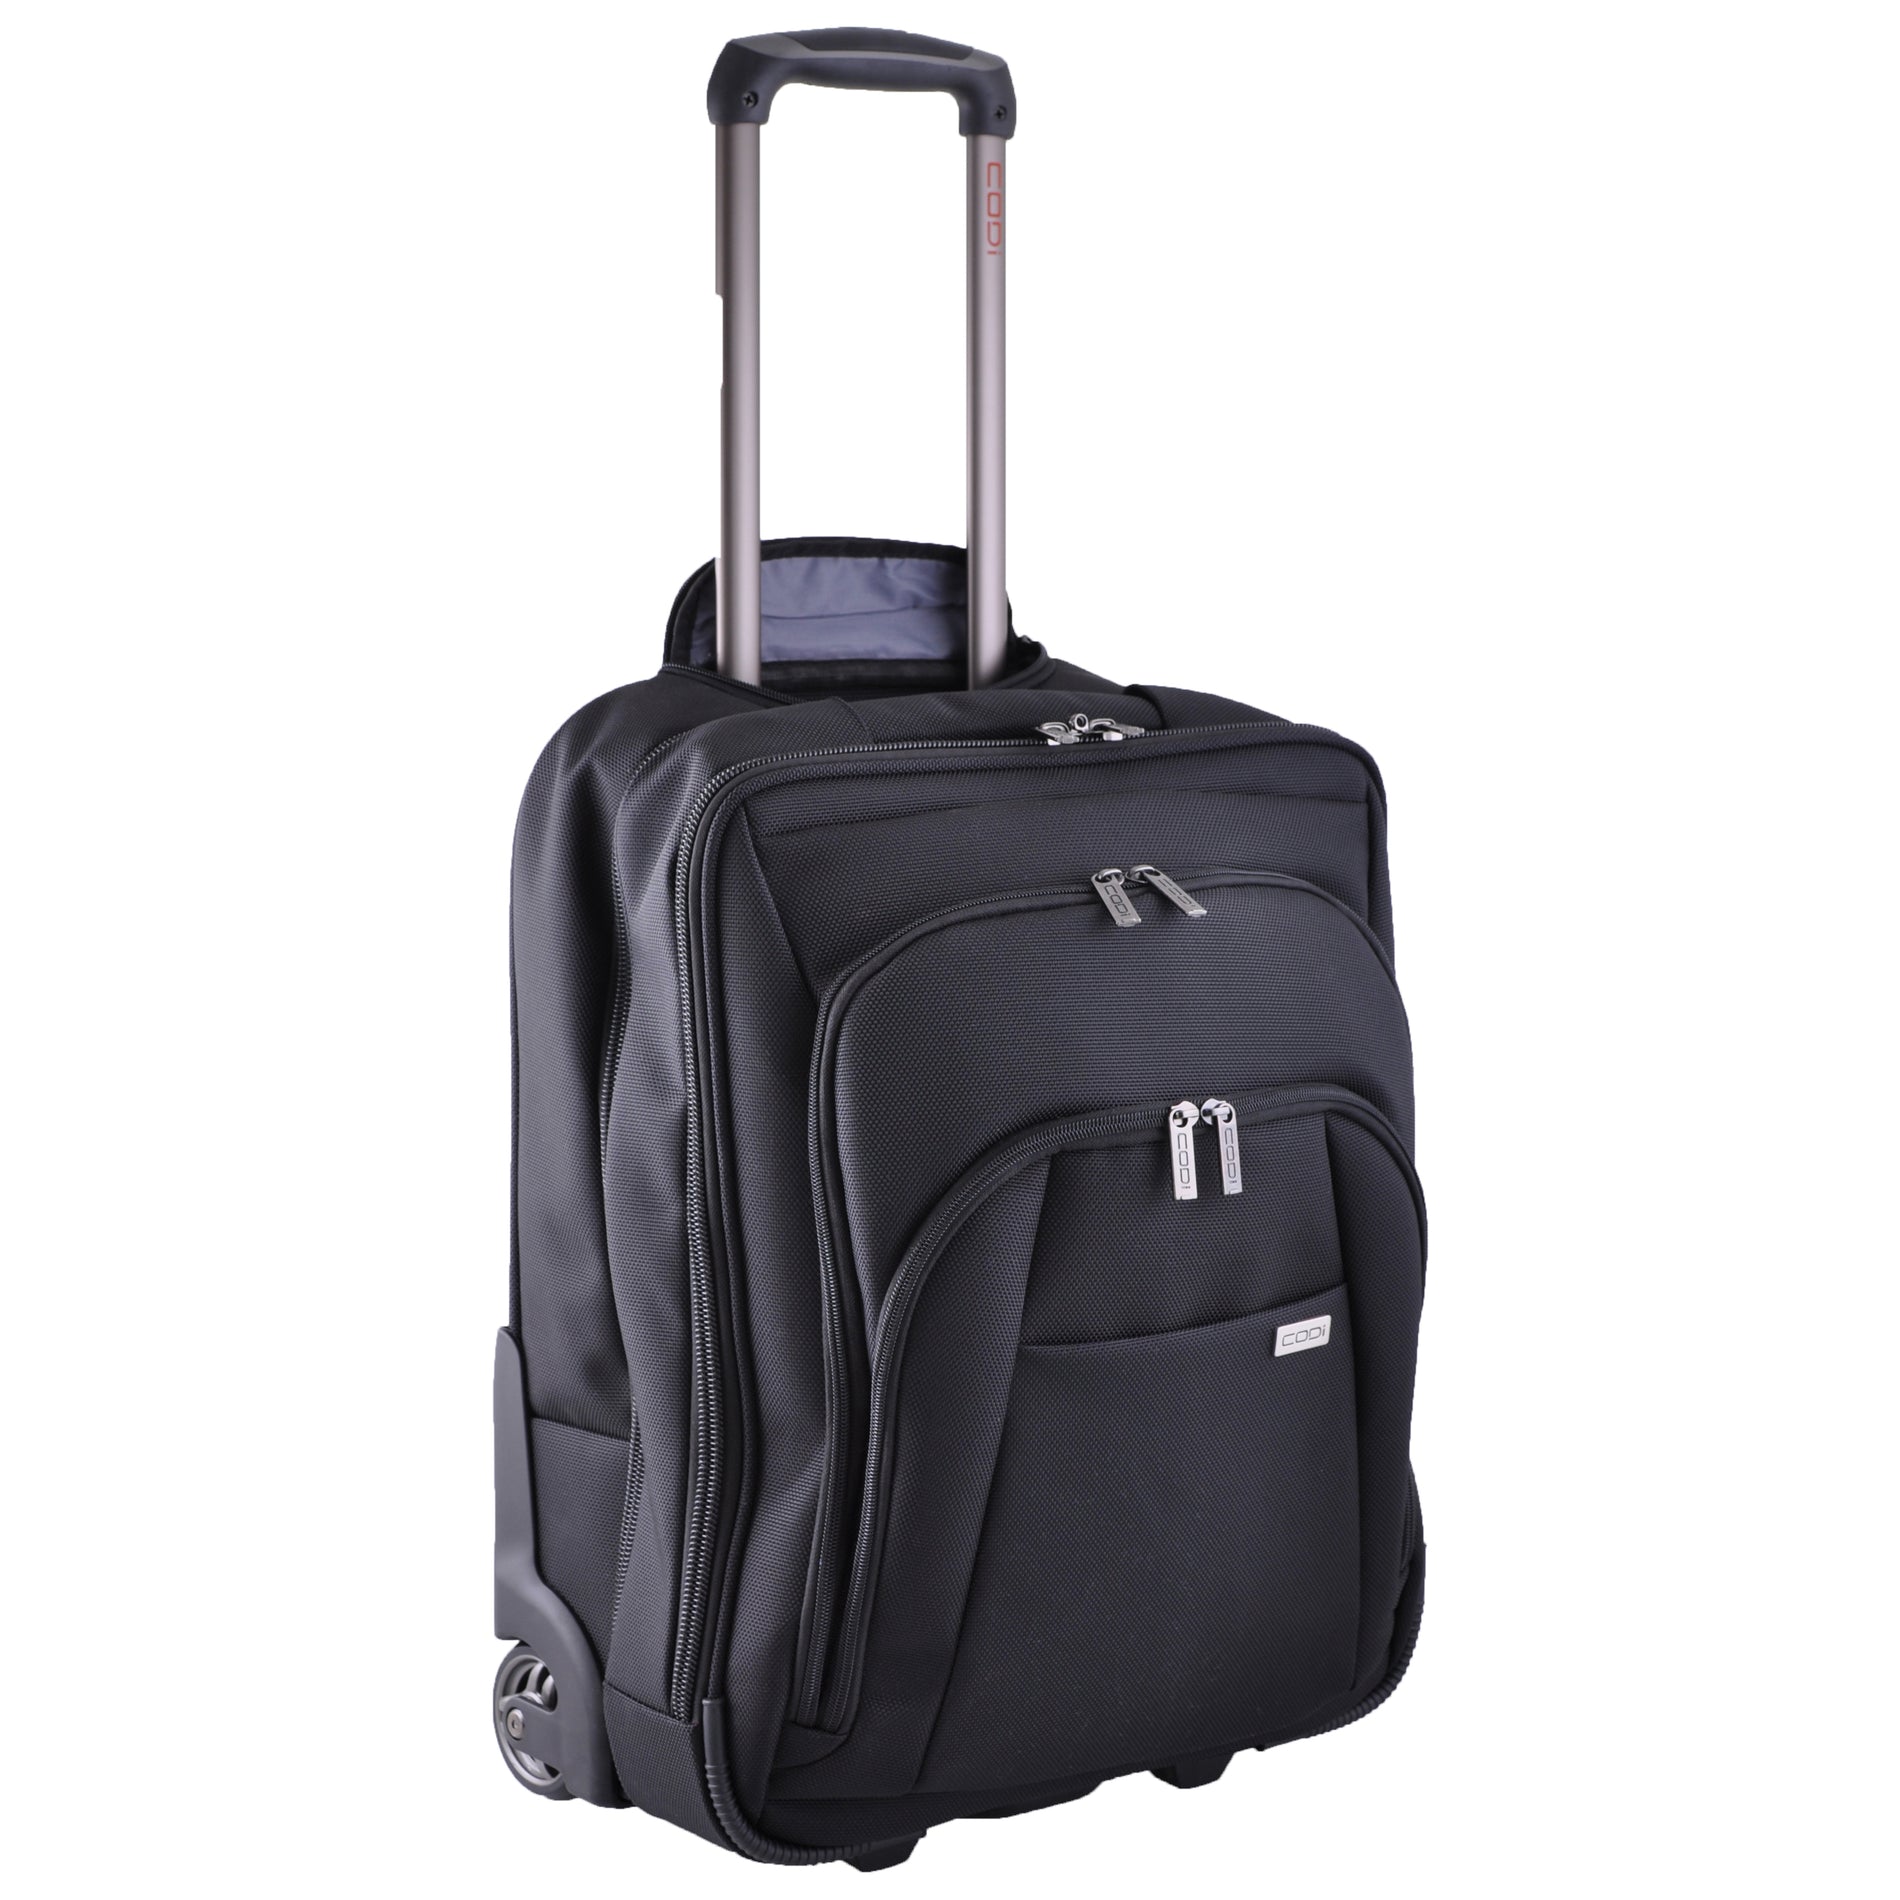 CODi C9035 Mobile Max - Tall, Travel/Luggage Case with Built-in Wheels, 17.3" Laptop Compartment, Telescoping Handle, Black